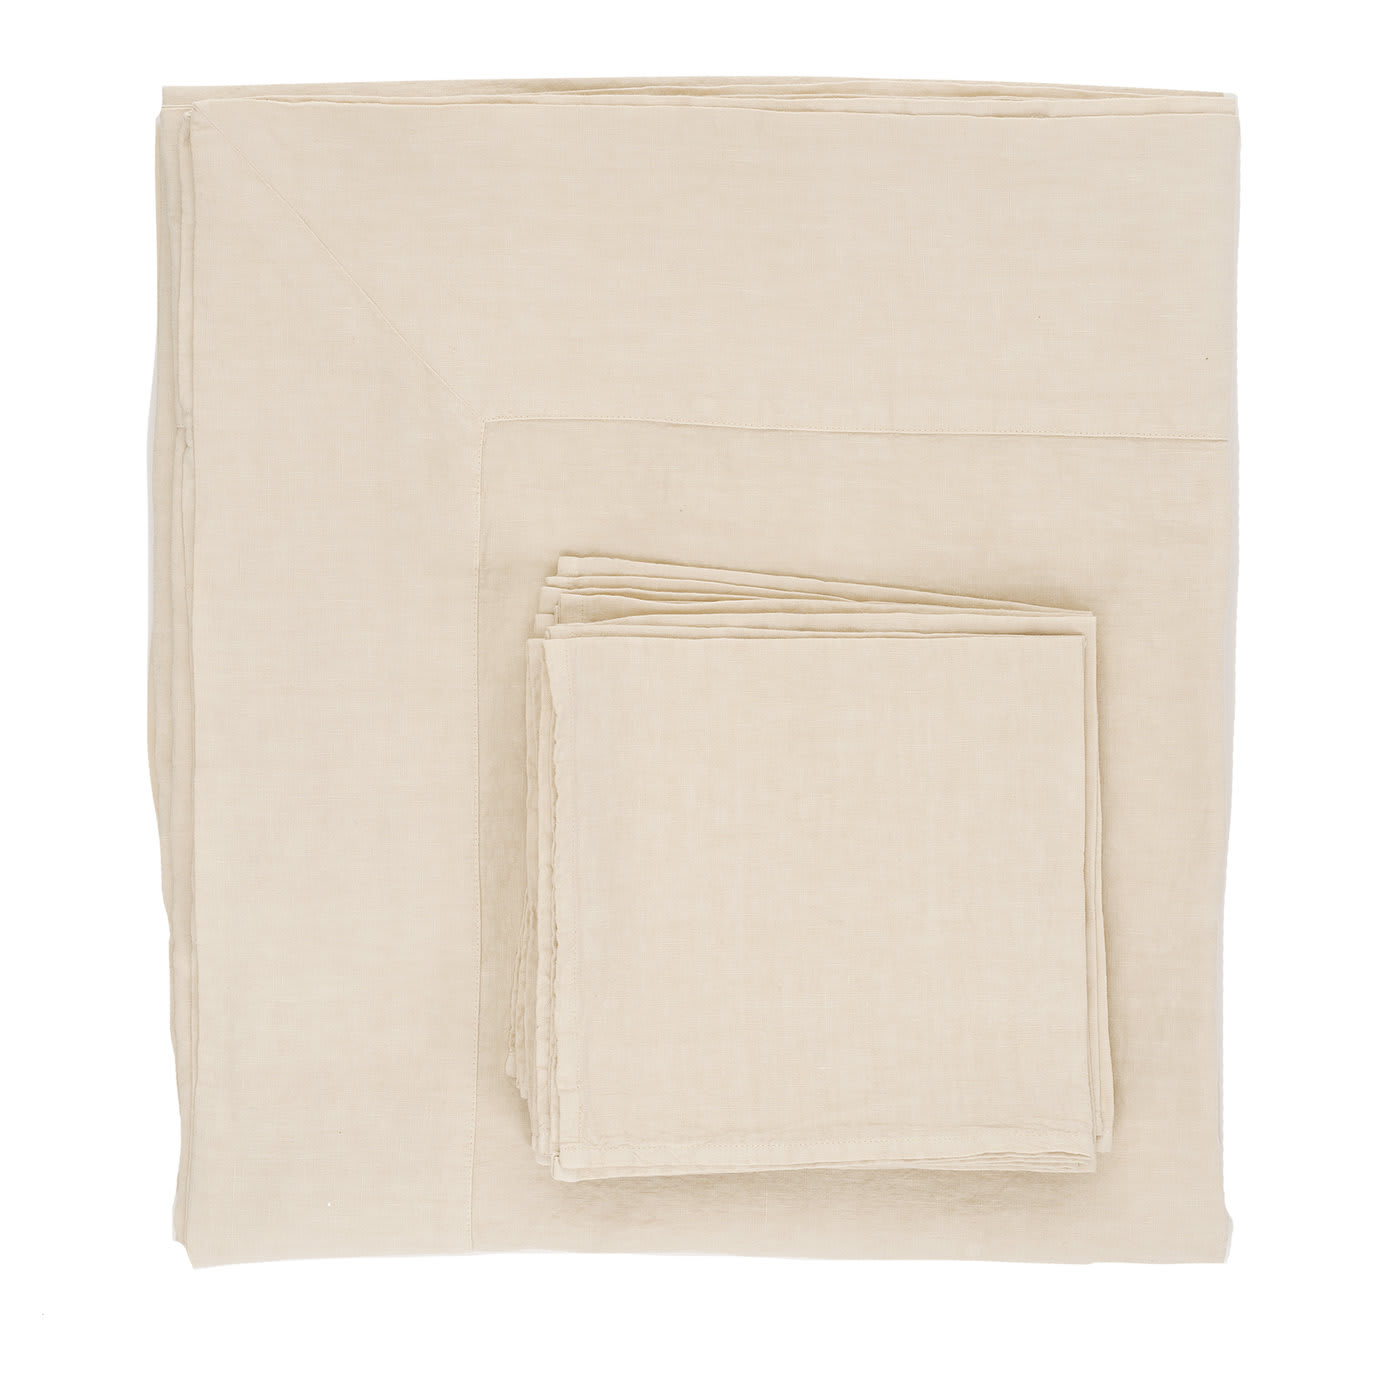 Linen Set of Tablecloth and Napkins - Once Milano